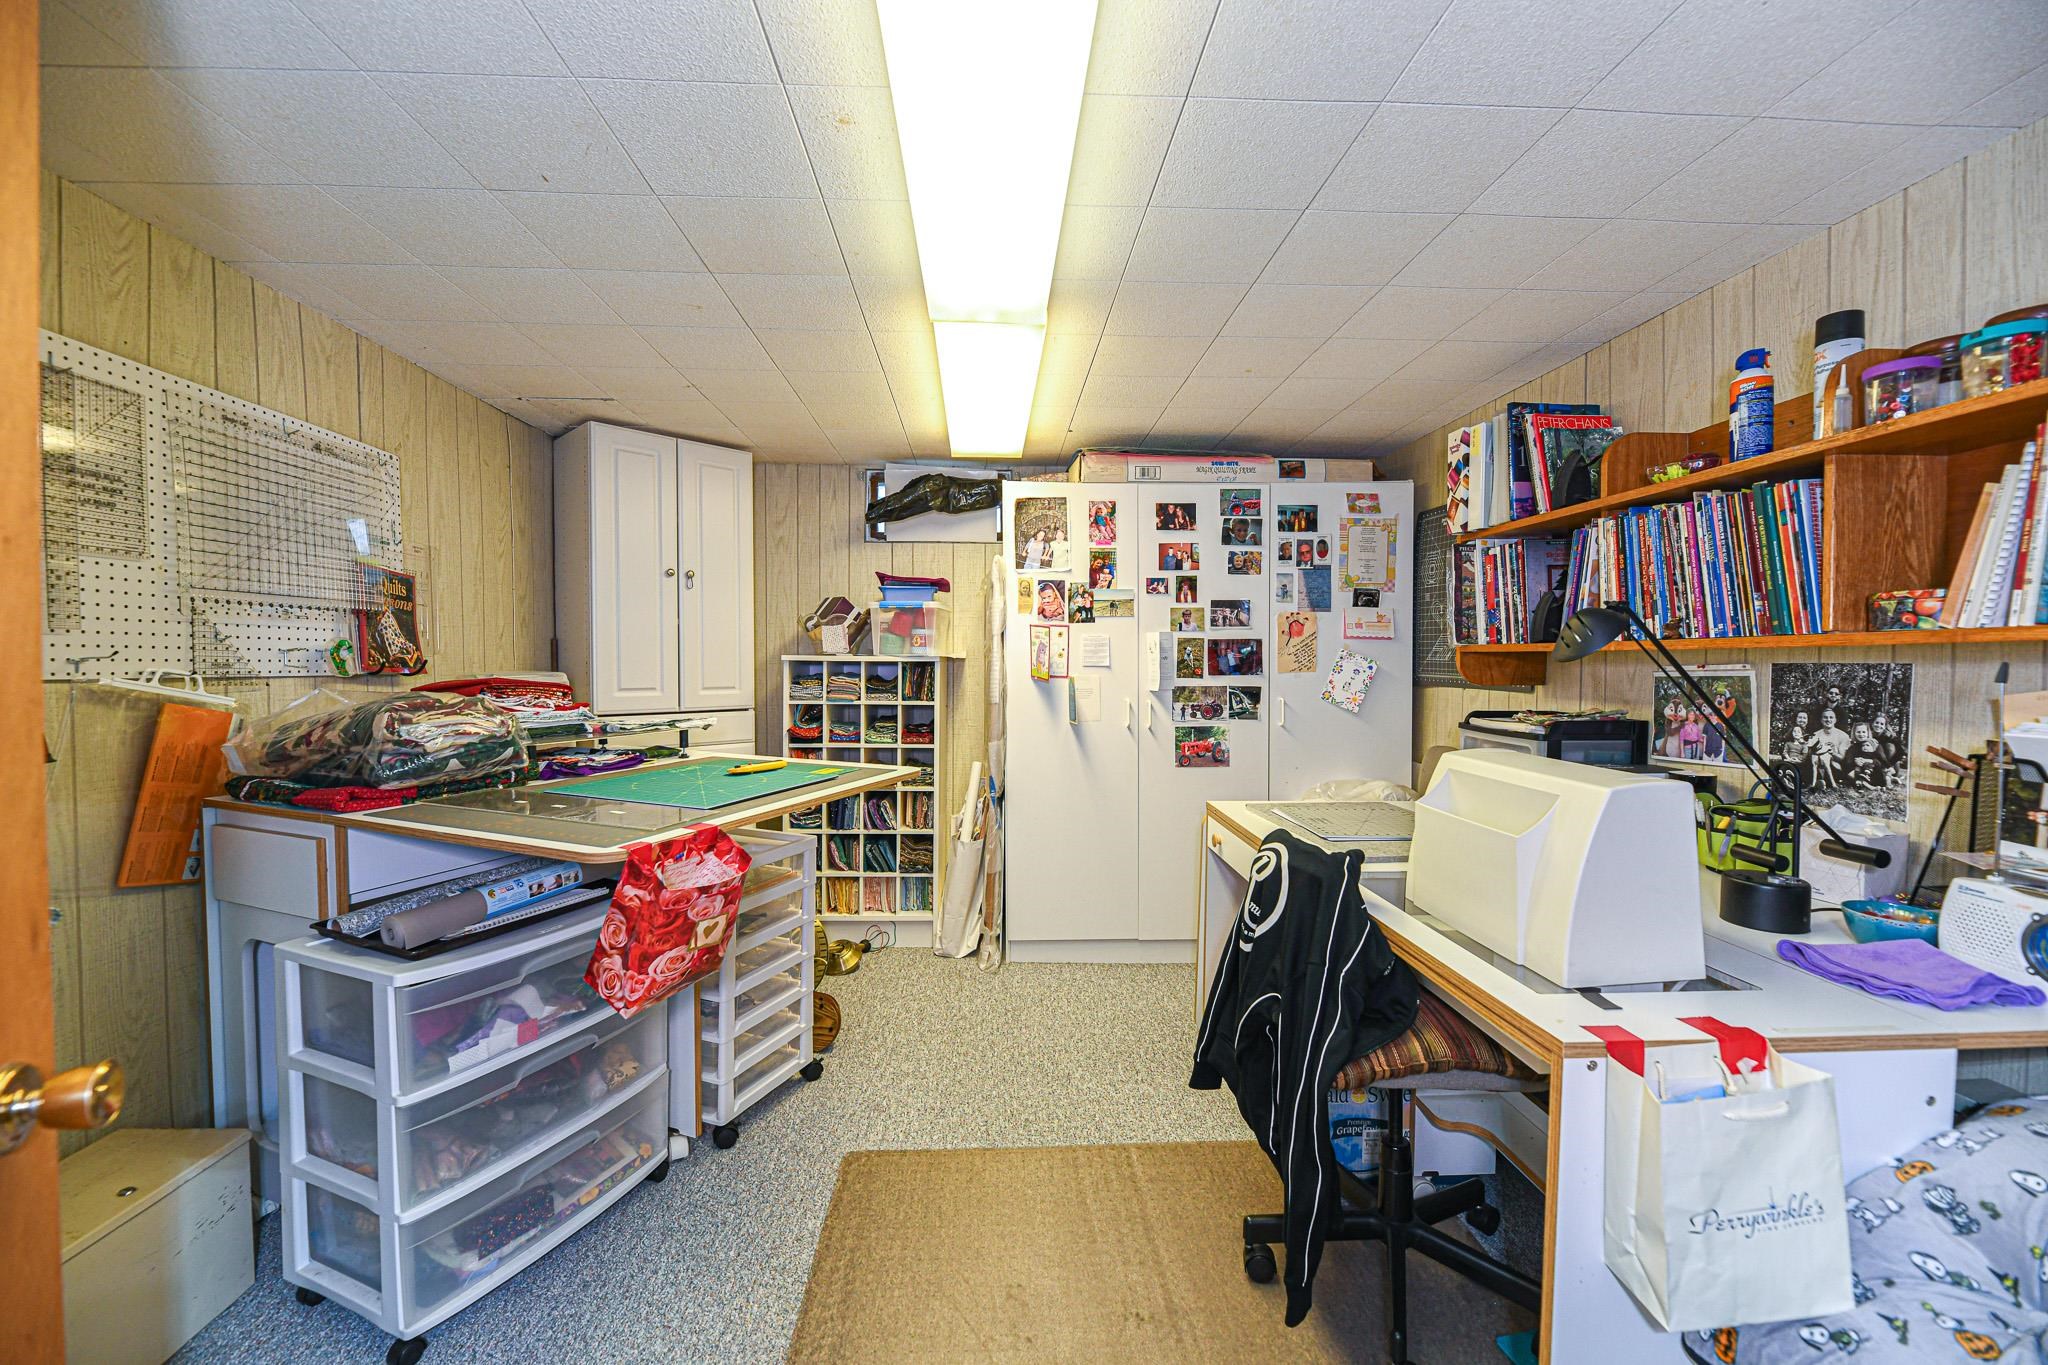 Quilting Room in the basement